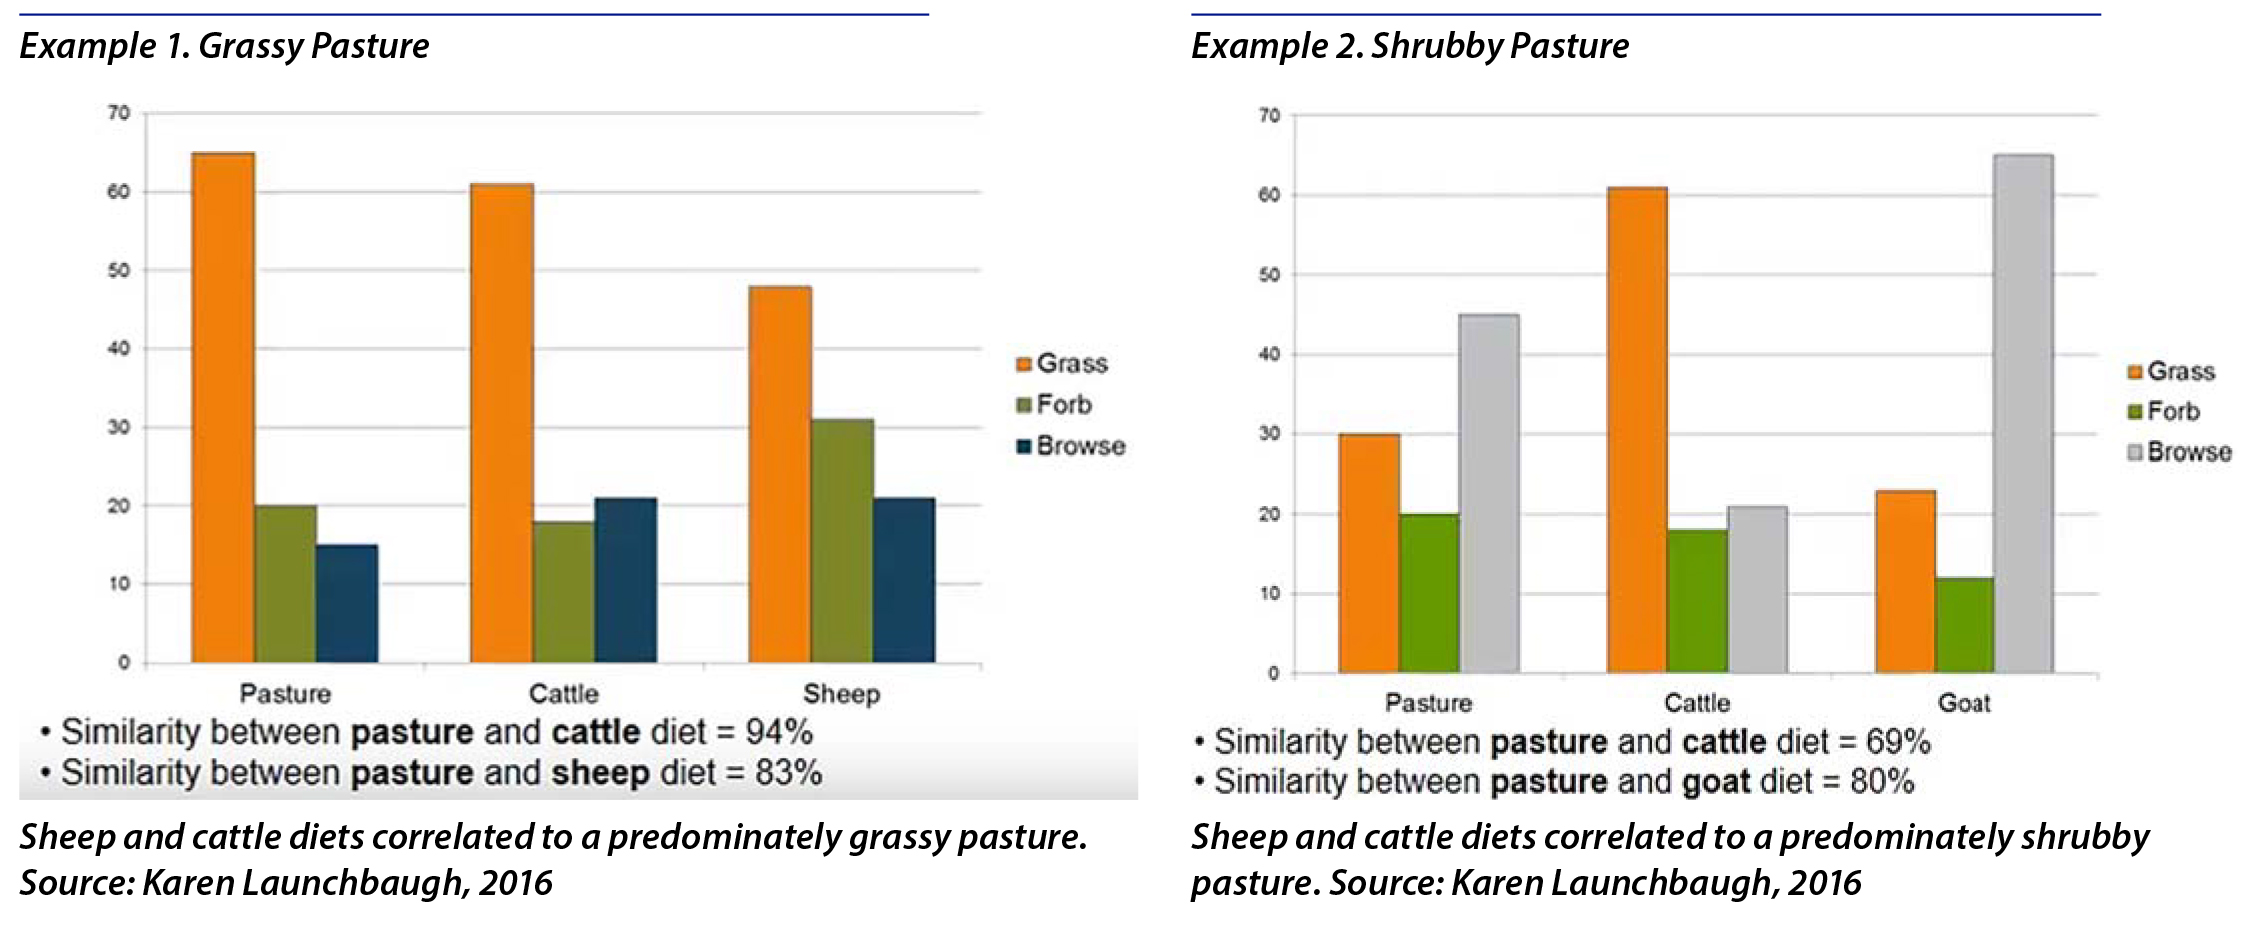 sheep and cattle diets